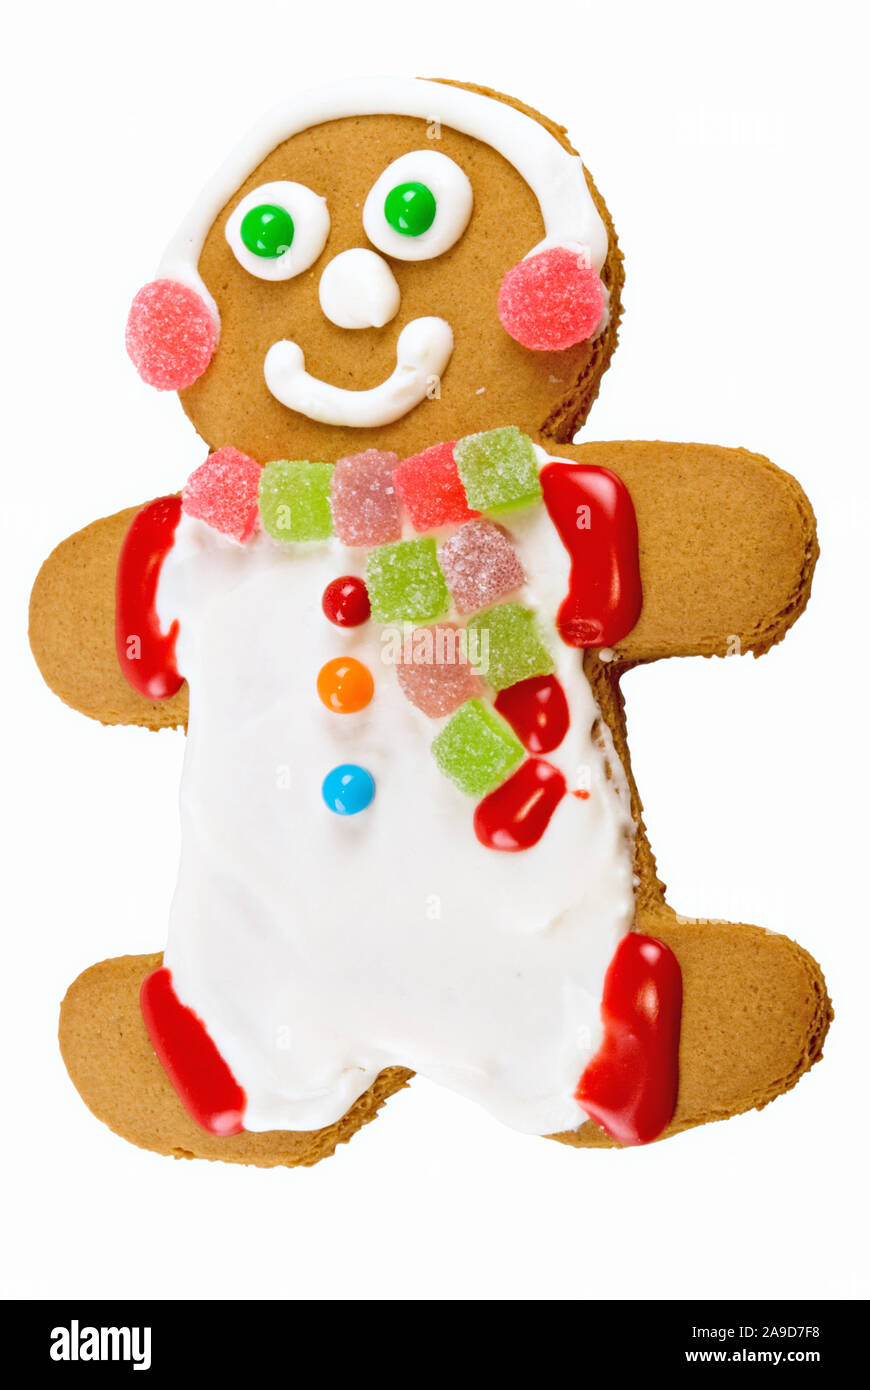 smiling gingerbread cookie man on an isolated white background. His clothing is made from frosting and candy. Stock Photo